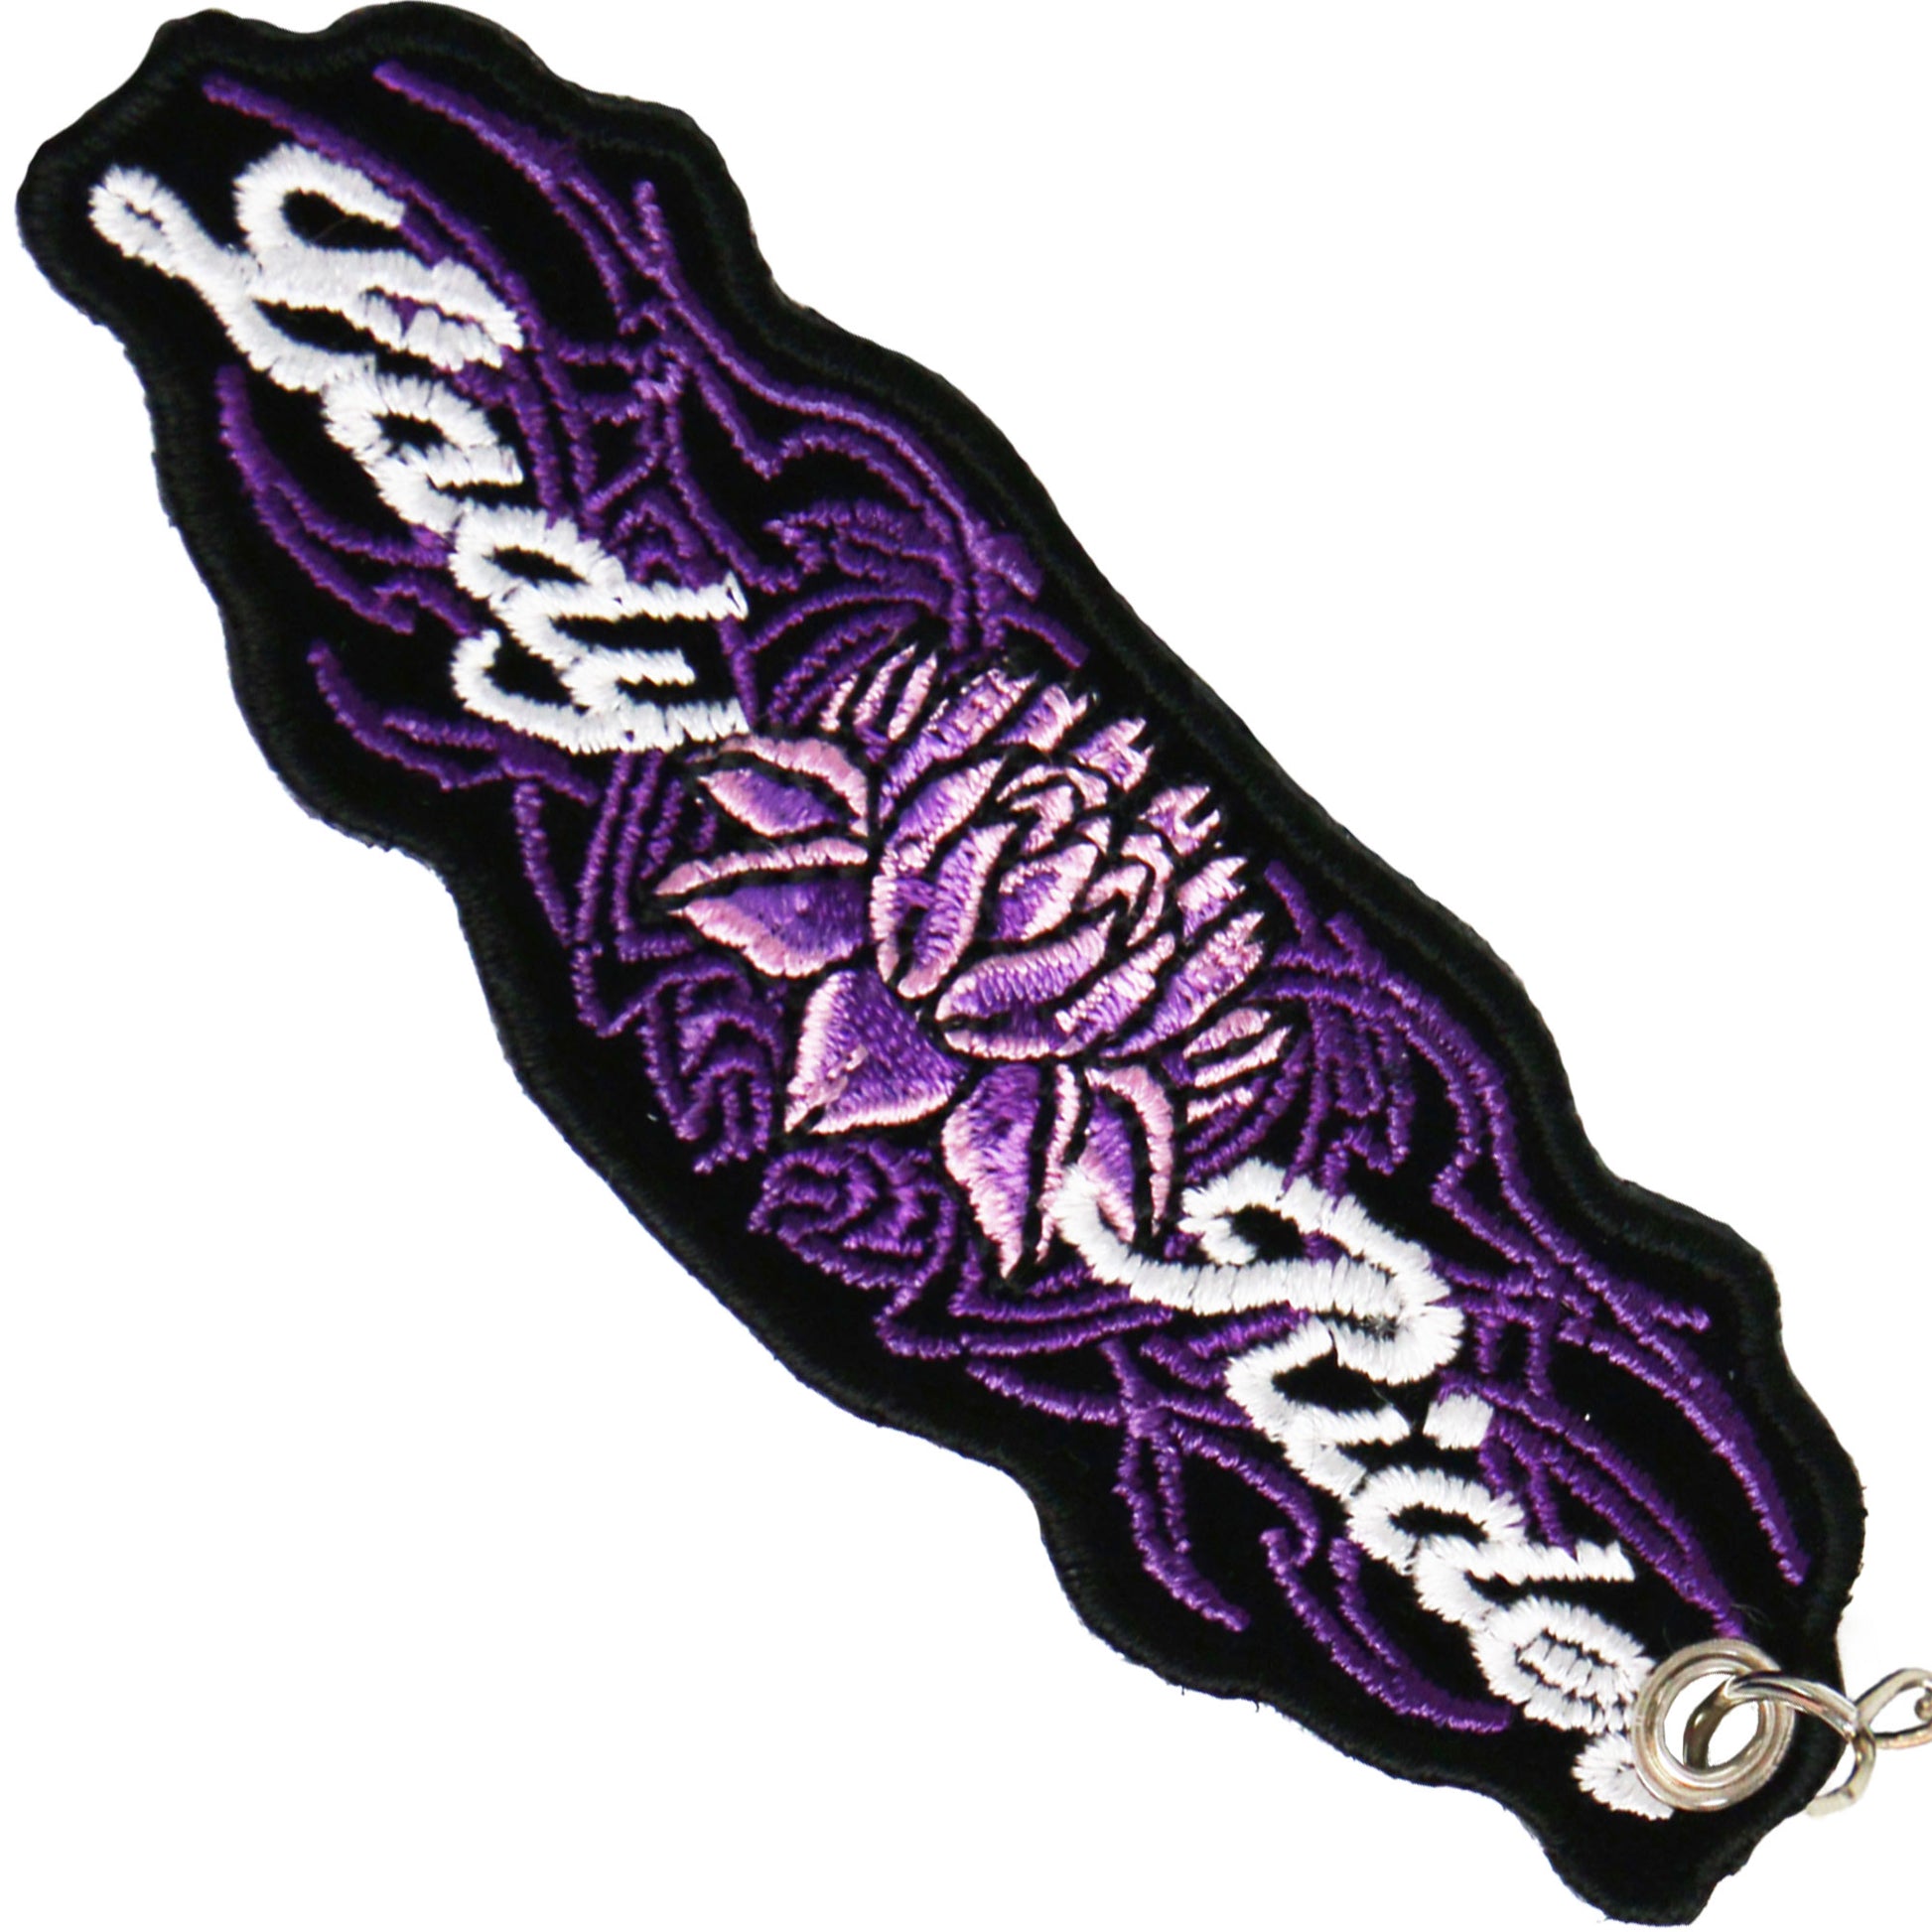 Hot Leathers KCH1032 Lady Rider Lotus Embroidered Key Chain